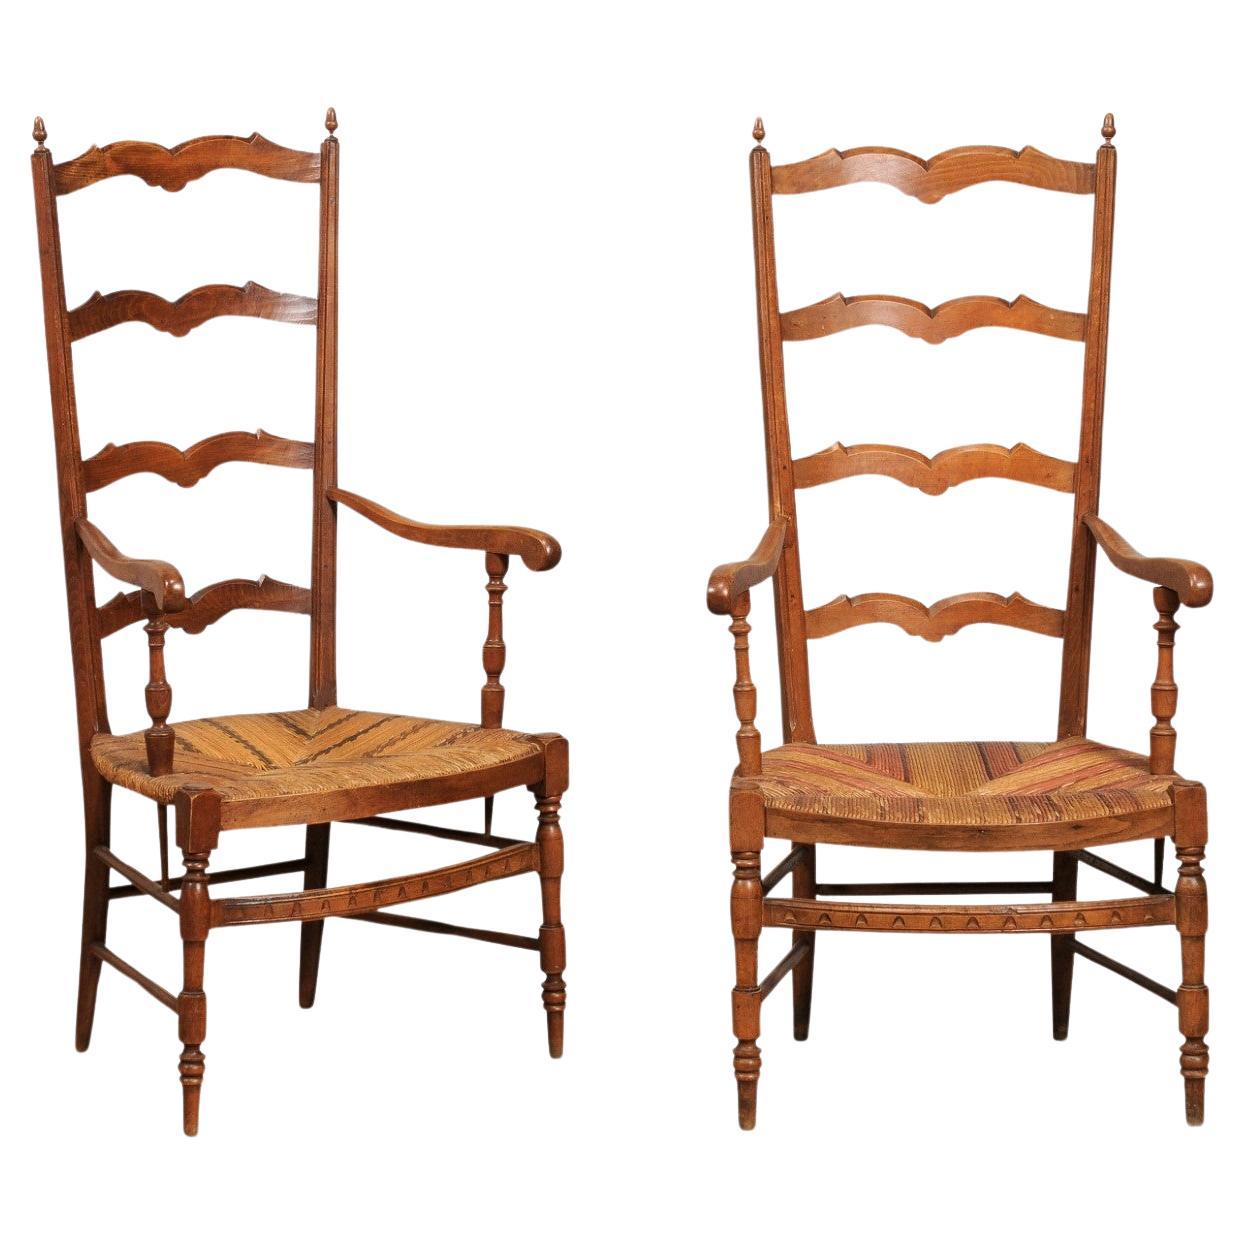 French 1890s Fruitwood Ladder Back Chairs with Straw Seats and Turned Legs For Sale